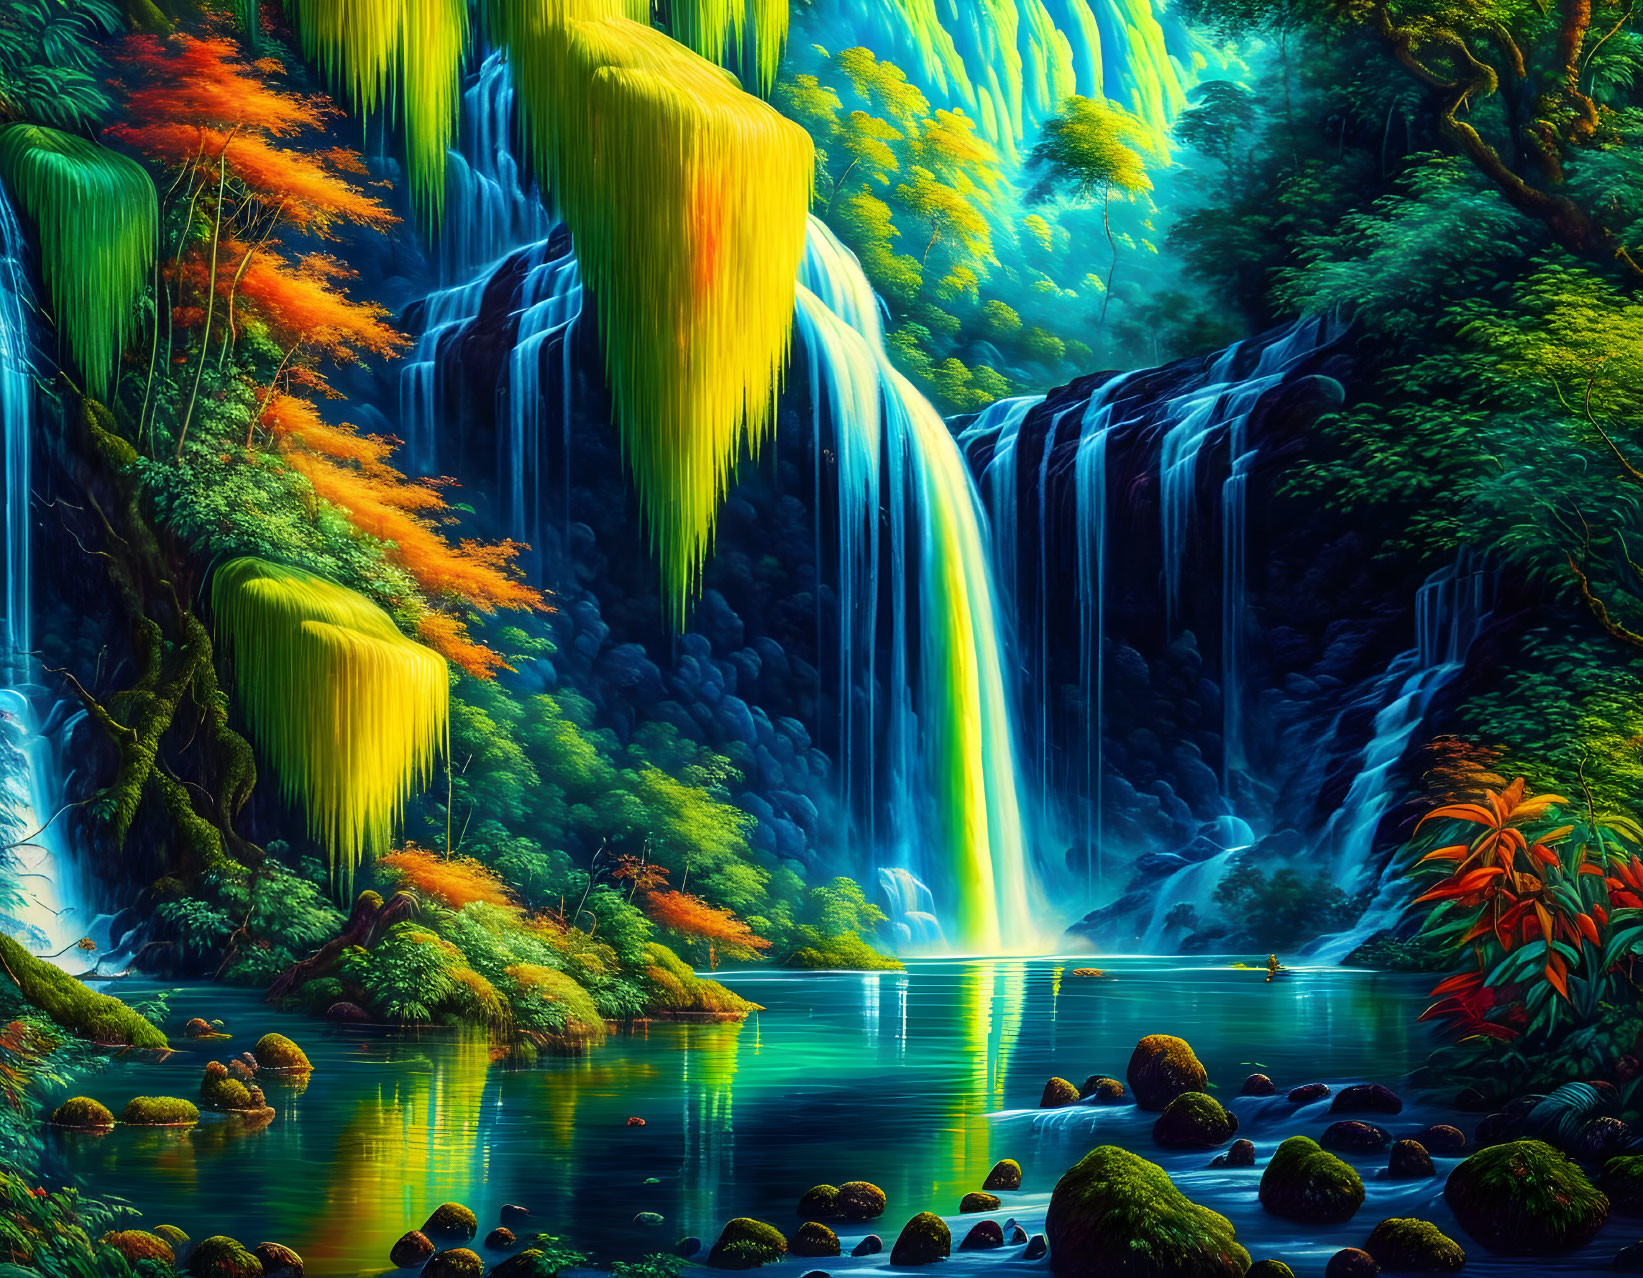 Colorful Digital Artwork of Cascading Waterfalls in Forest